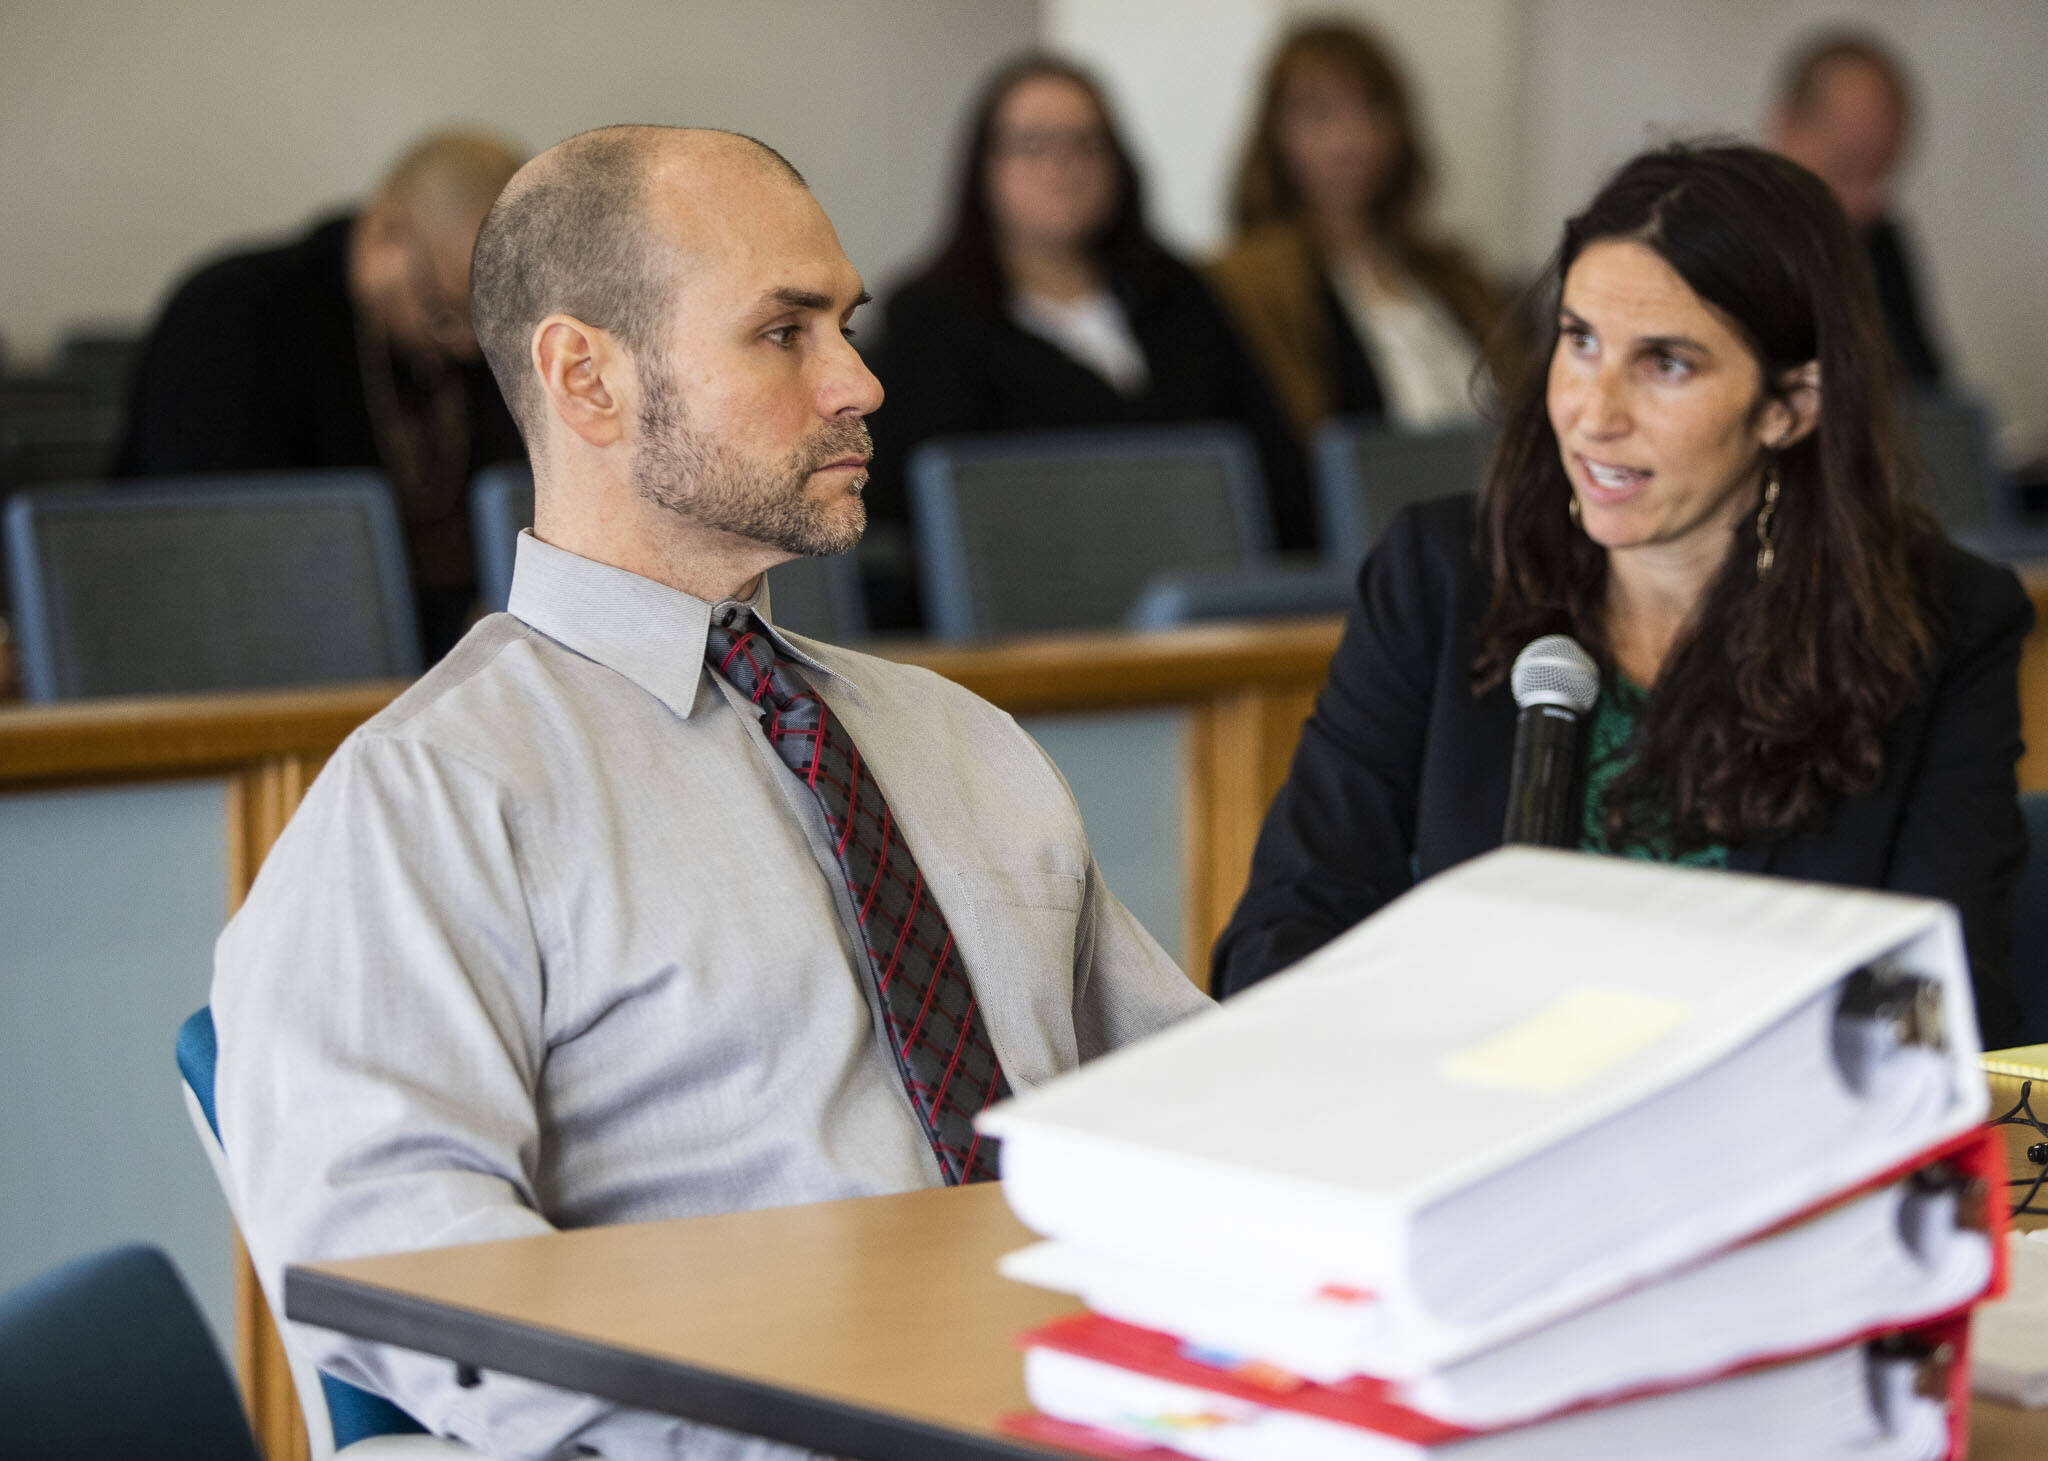 Steven Eggers listens while his attorney speaks about his traumatic childhood during his resentencing hearing at the Snohomish County Courthouse on Monday, April 17, 2023 in Everett, Washington. (Olivia Vanni / The Herald)